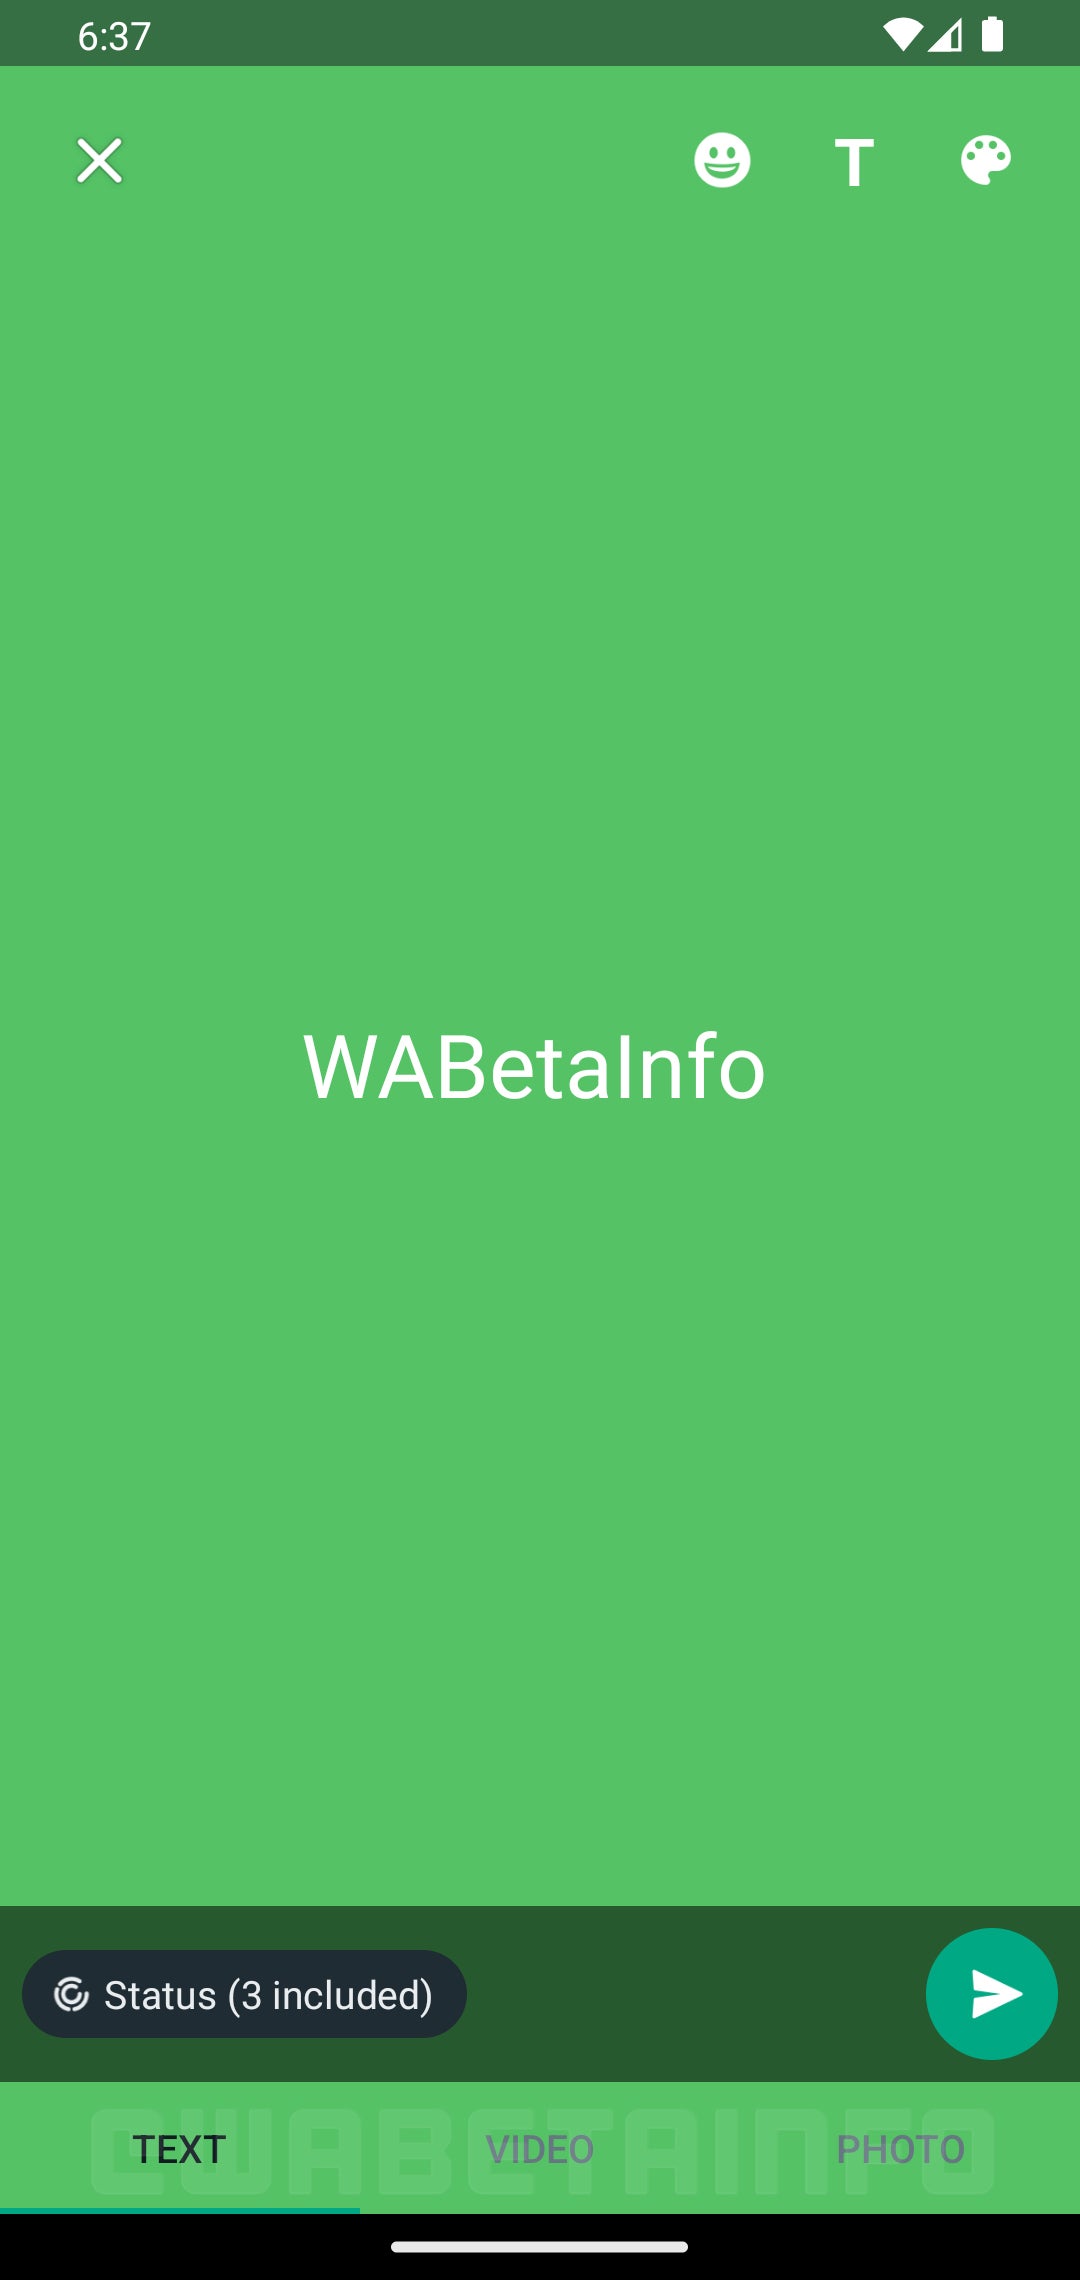 Image Credit–WABetaInfo - WhatsApp is testing a new interface to share text-based status updates easily